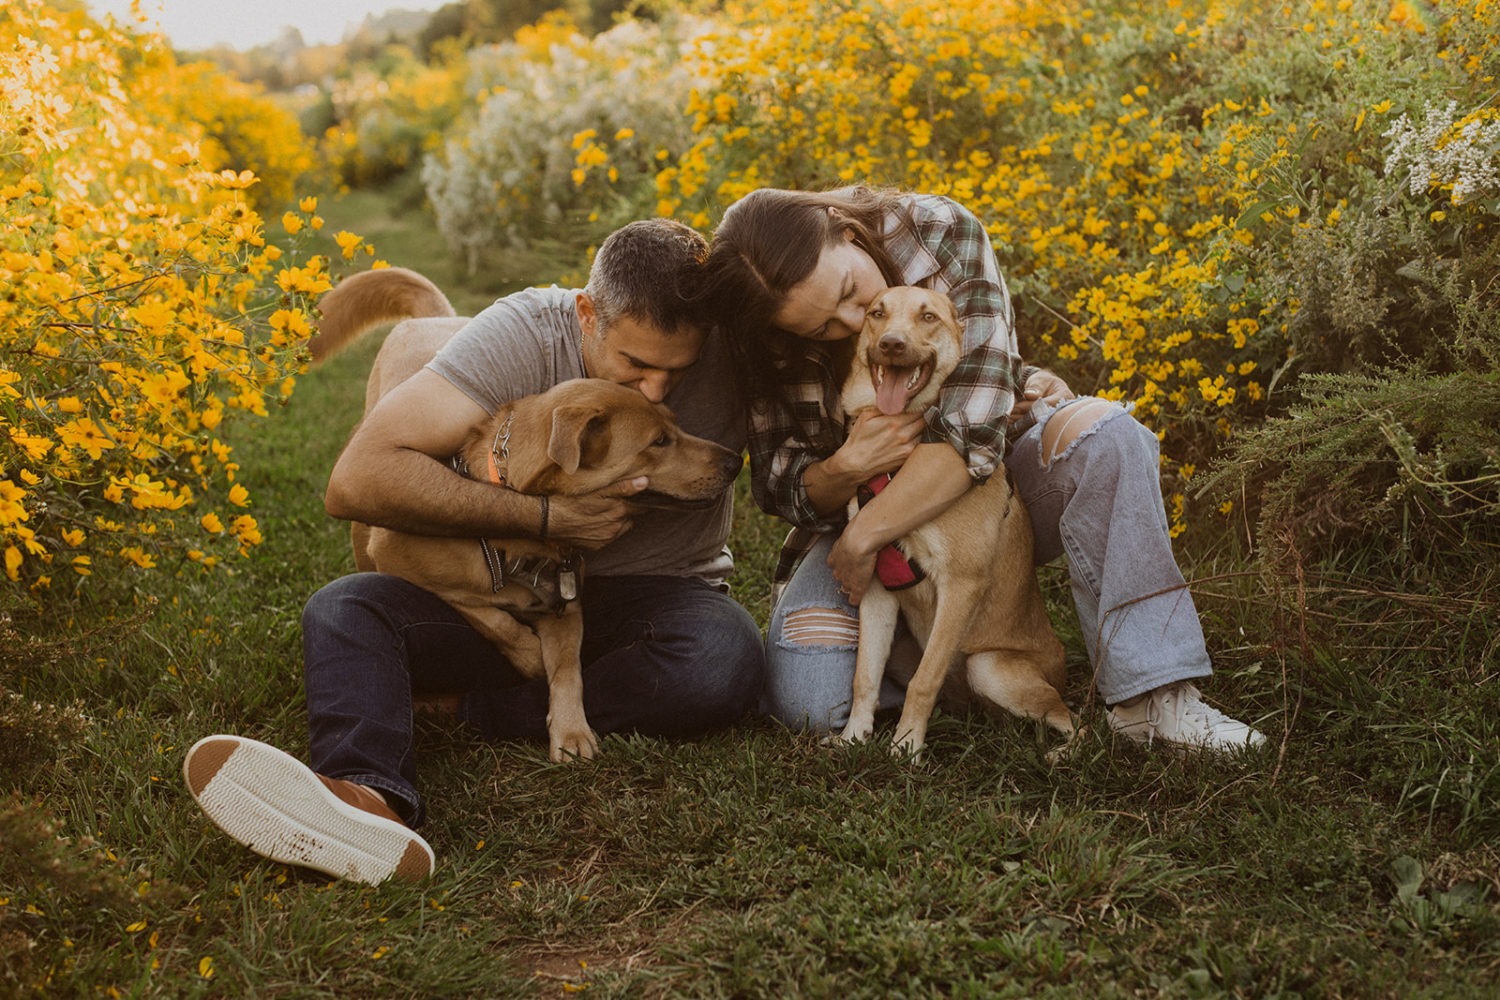 engagement photos with dogs in wildflower field